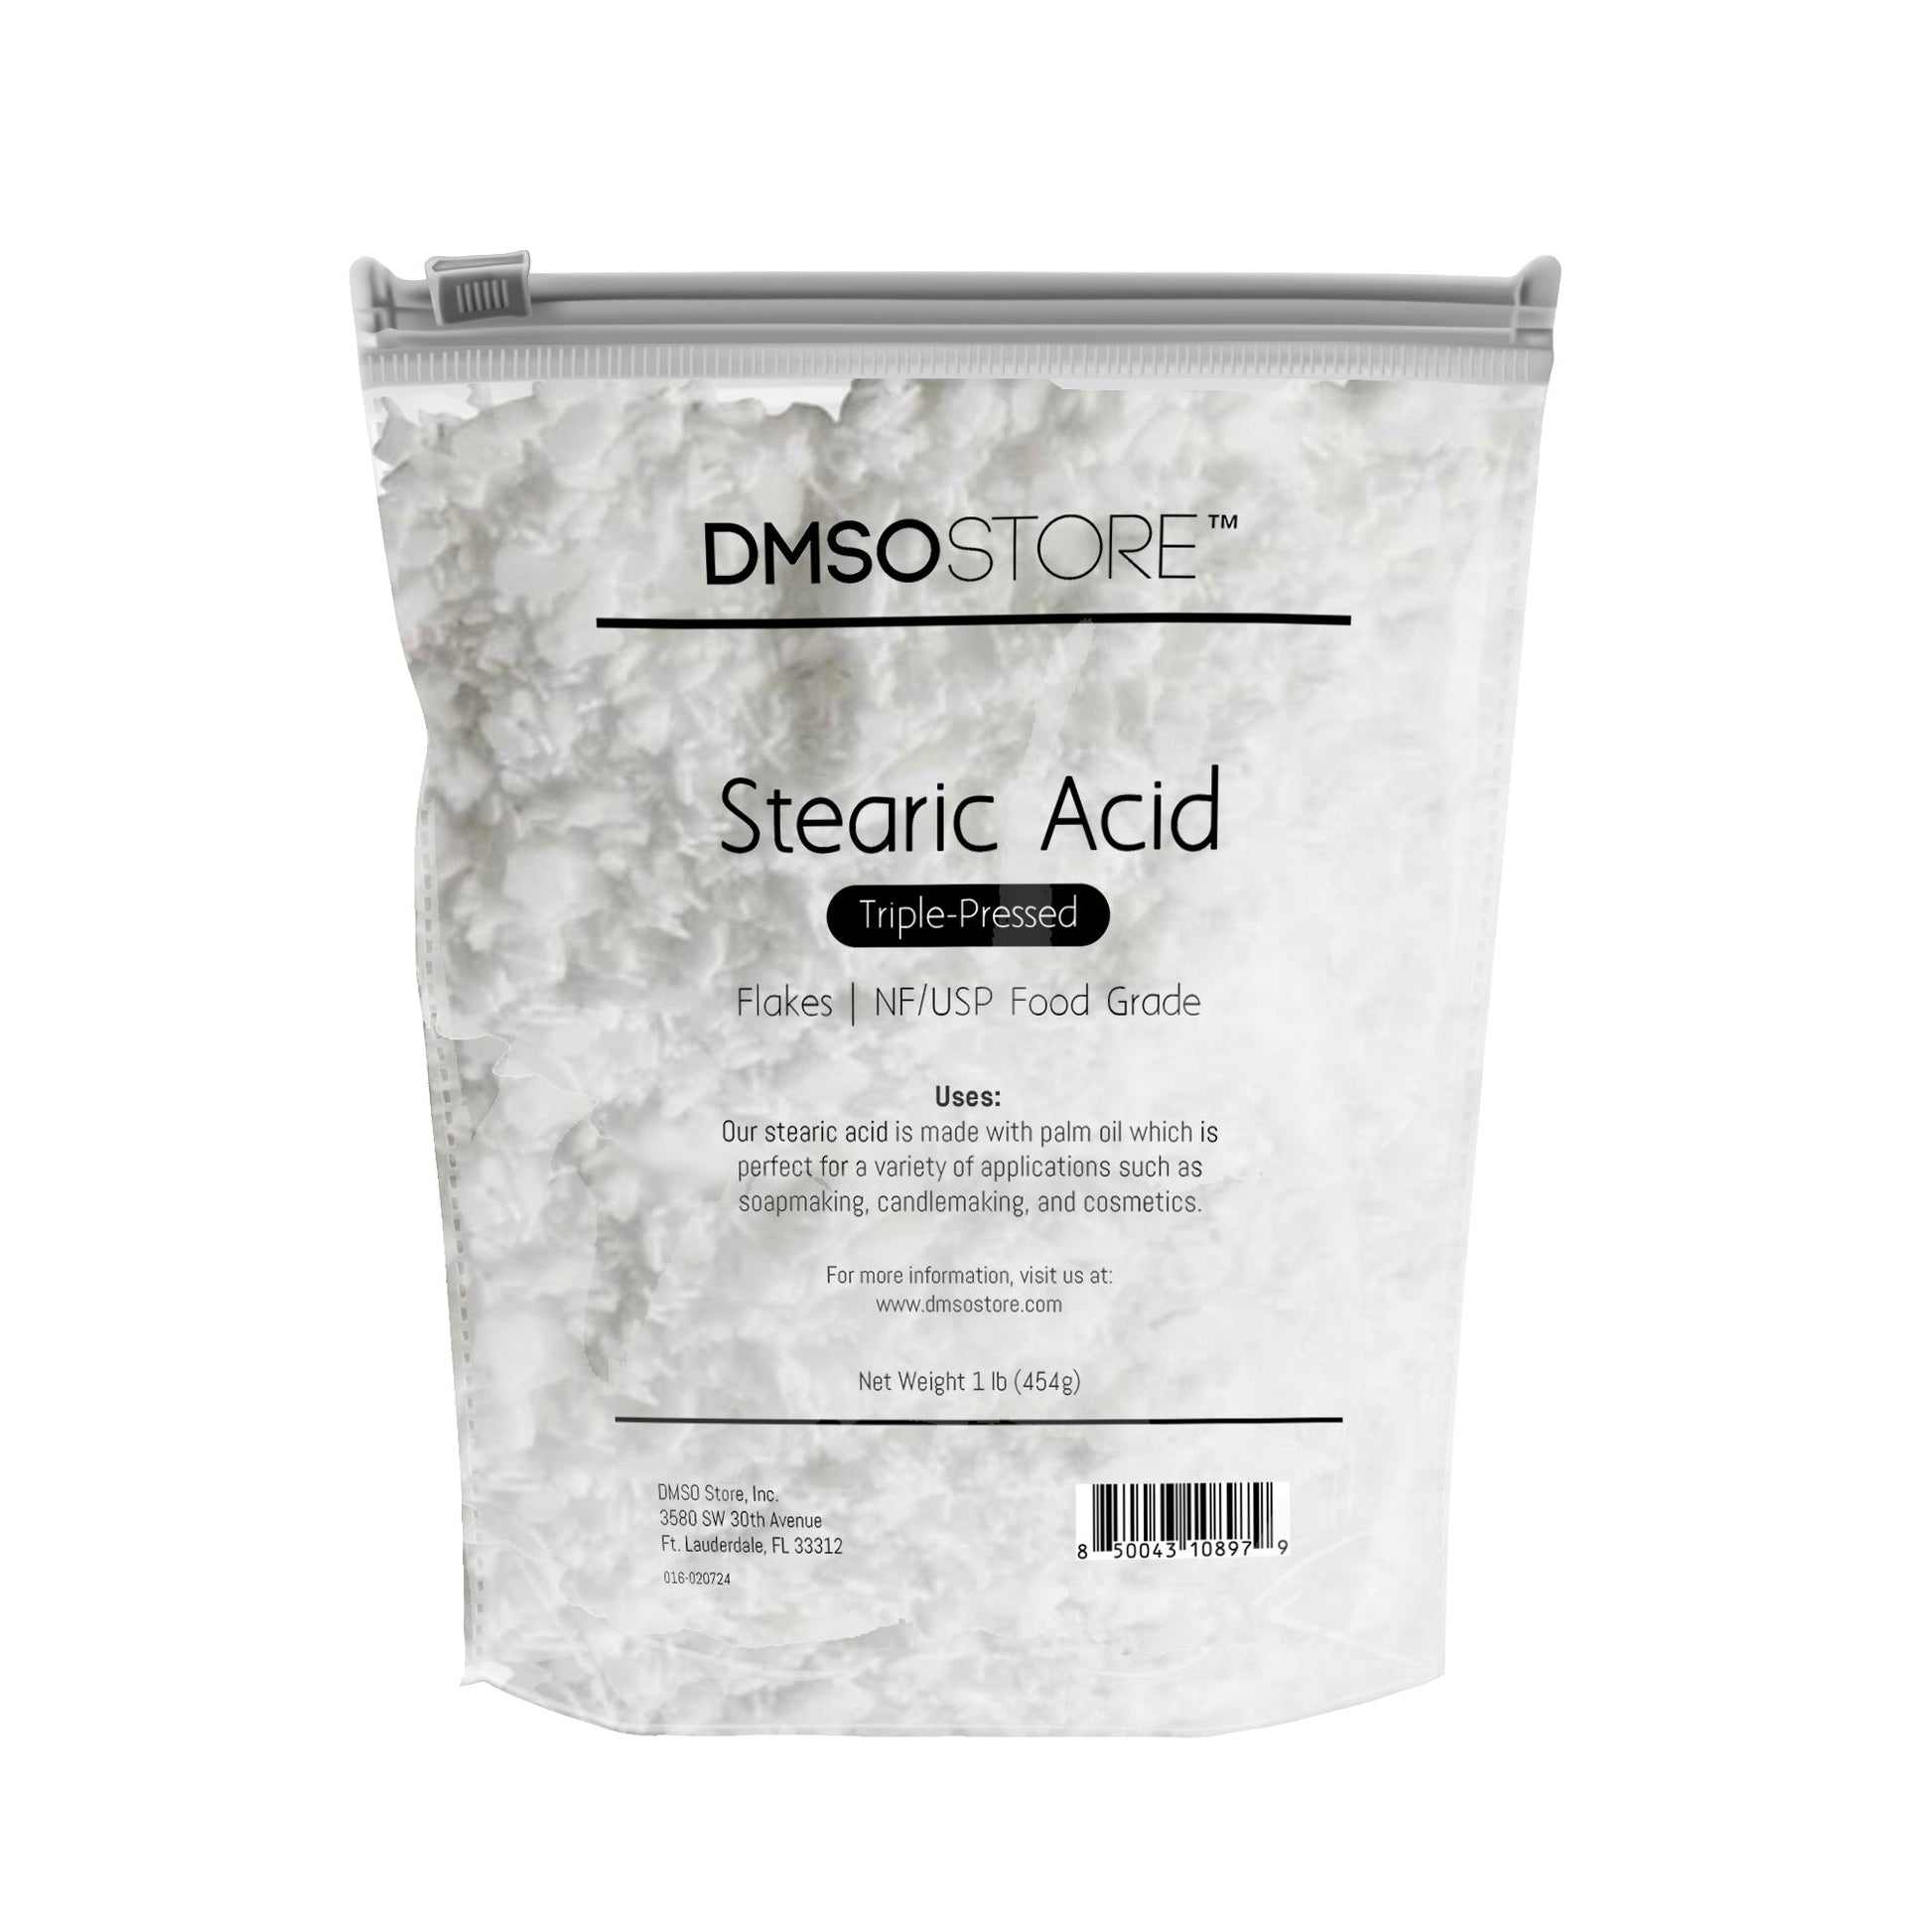 1 lb. DMSO Store brand Stearic Acid flakes, triple-pressed and NF/USP food grade, for soap making, candle making, and cosmetics.